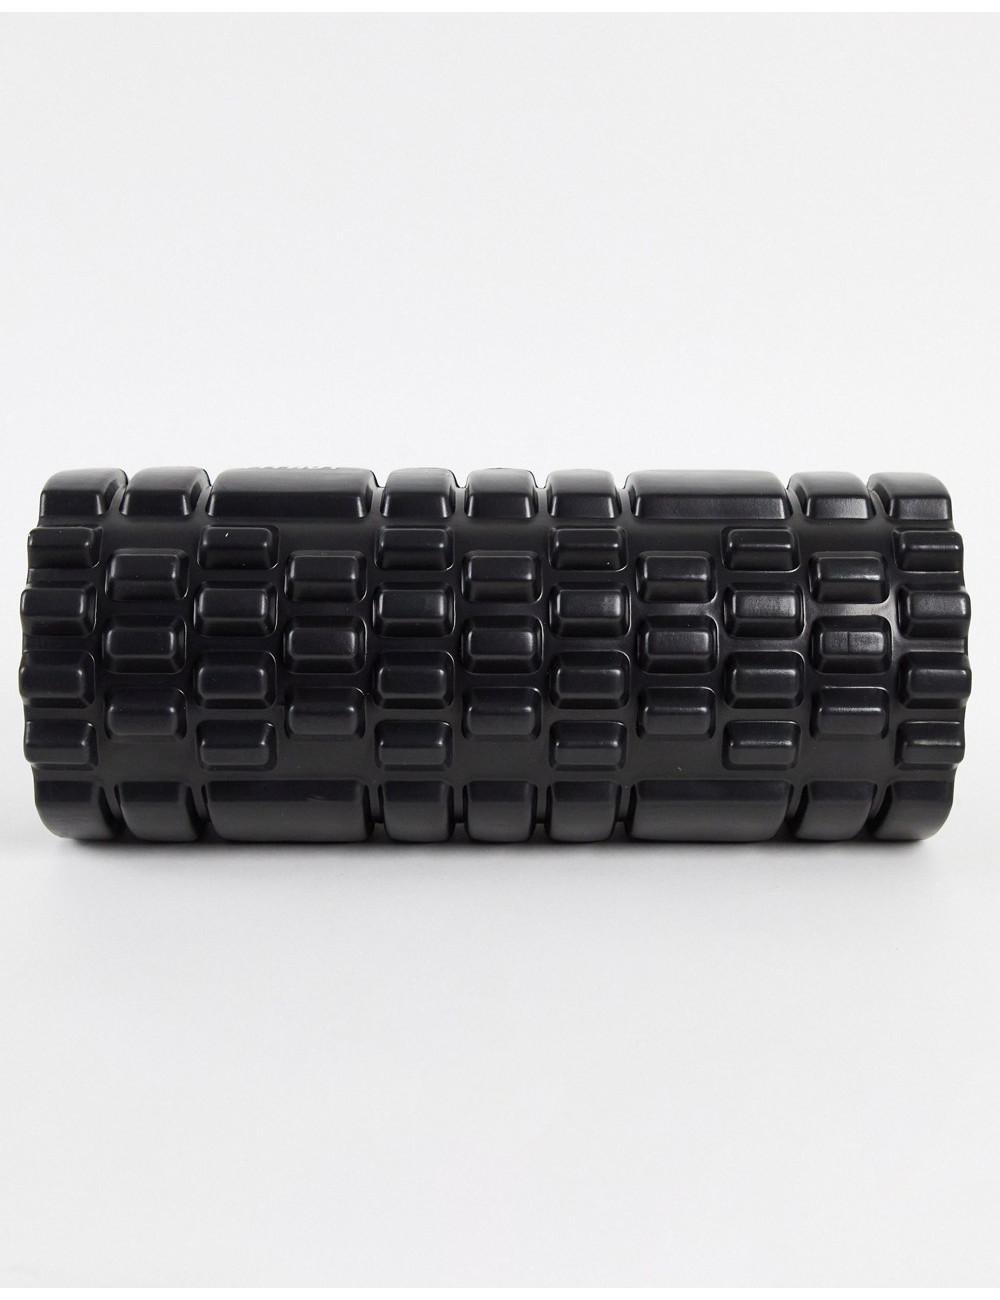 FITHUT foam roller with...